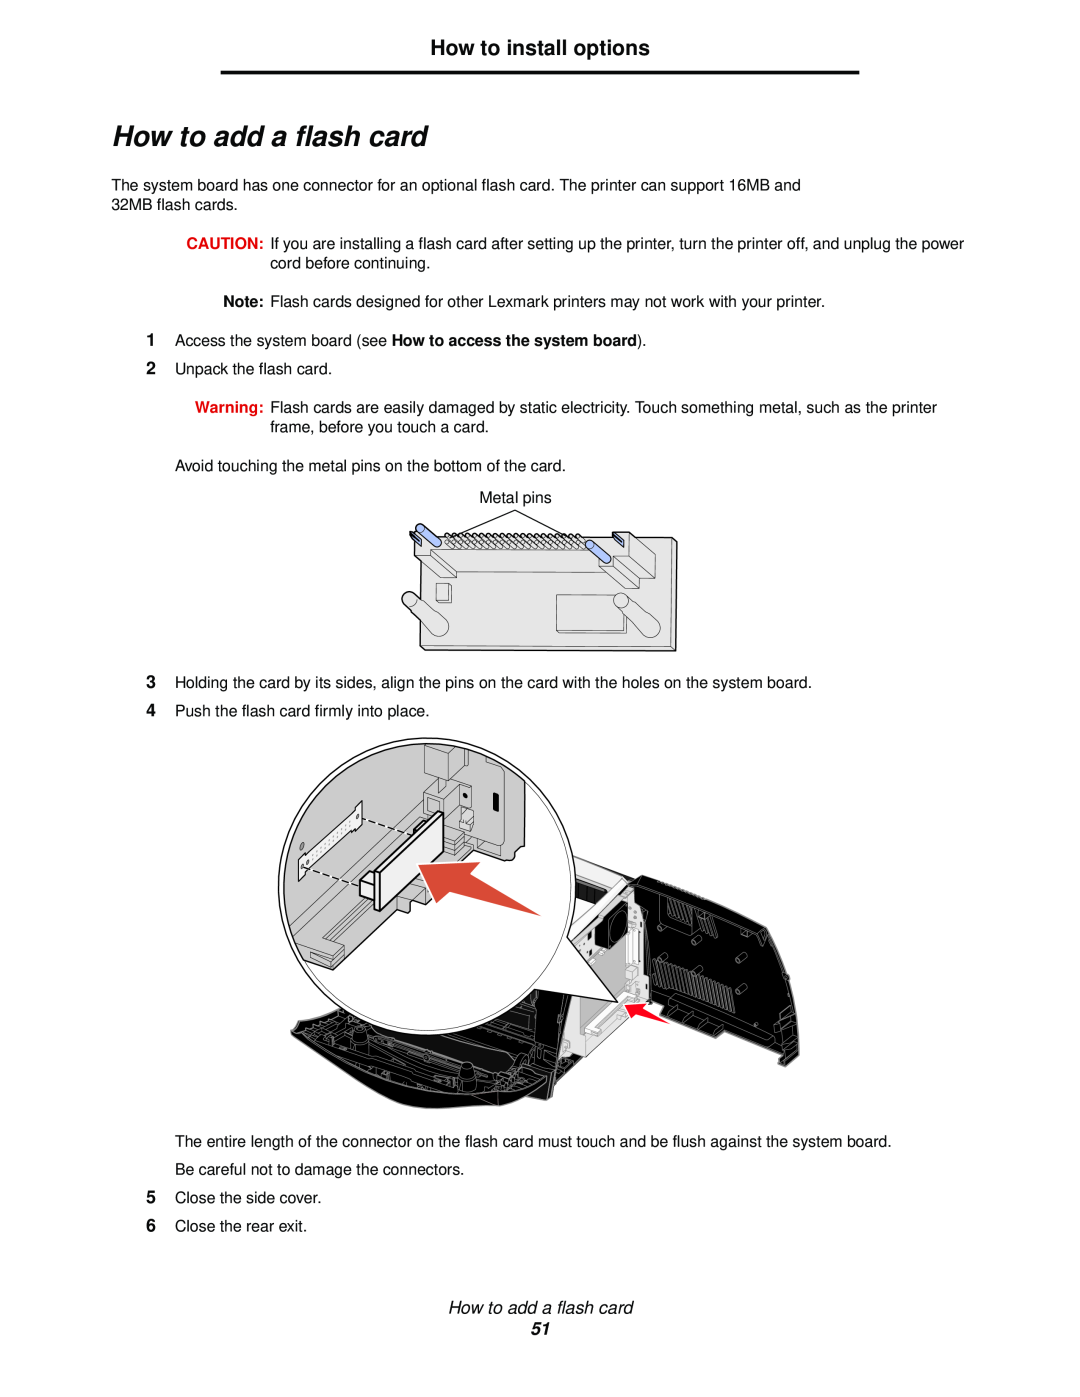 Lexmark 340, 342n manual How to add a flash card, How to install options 